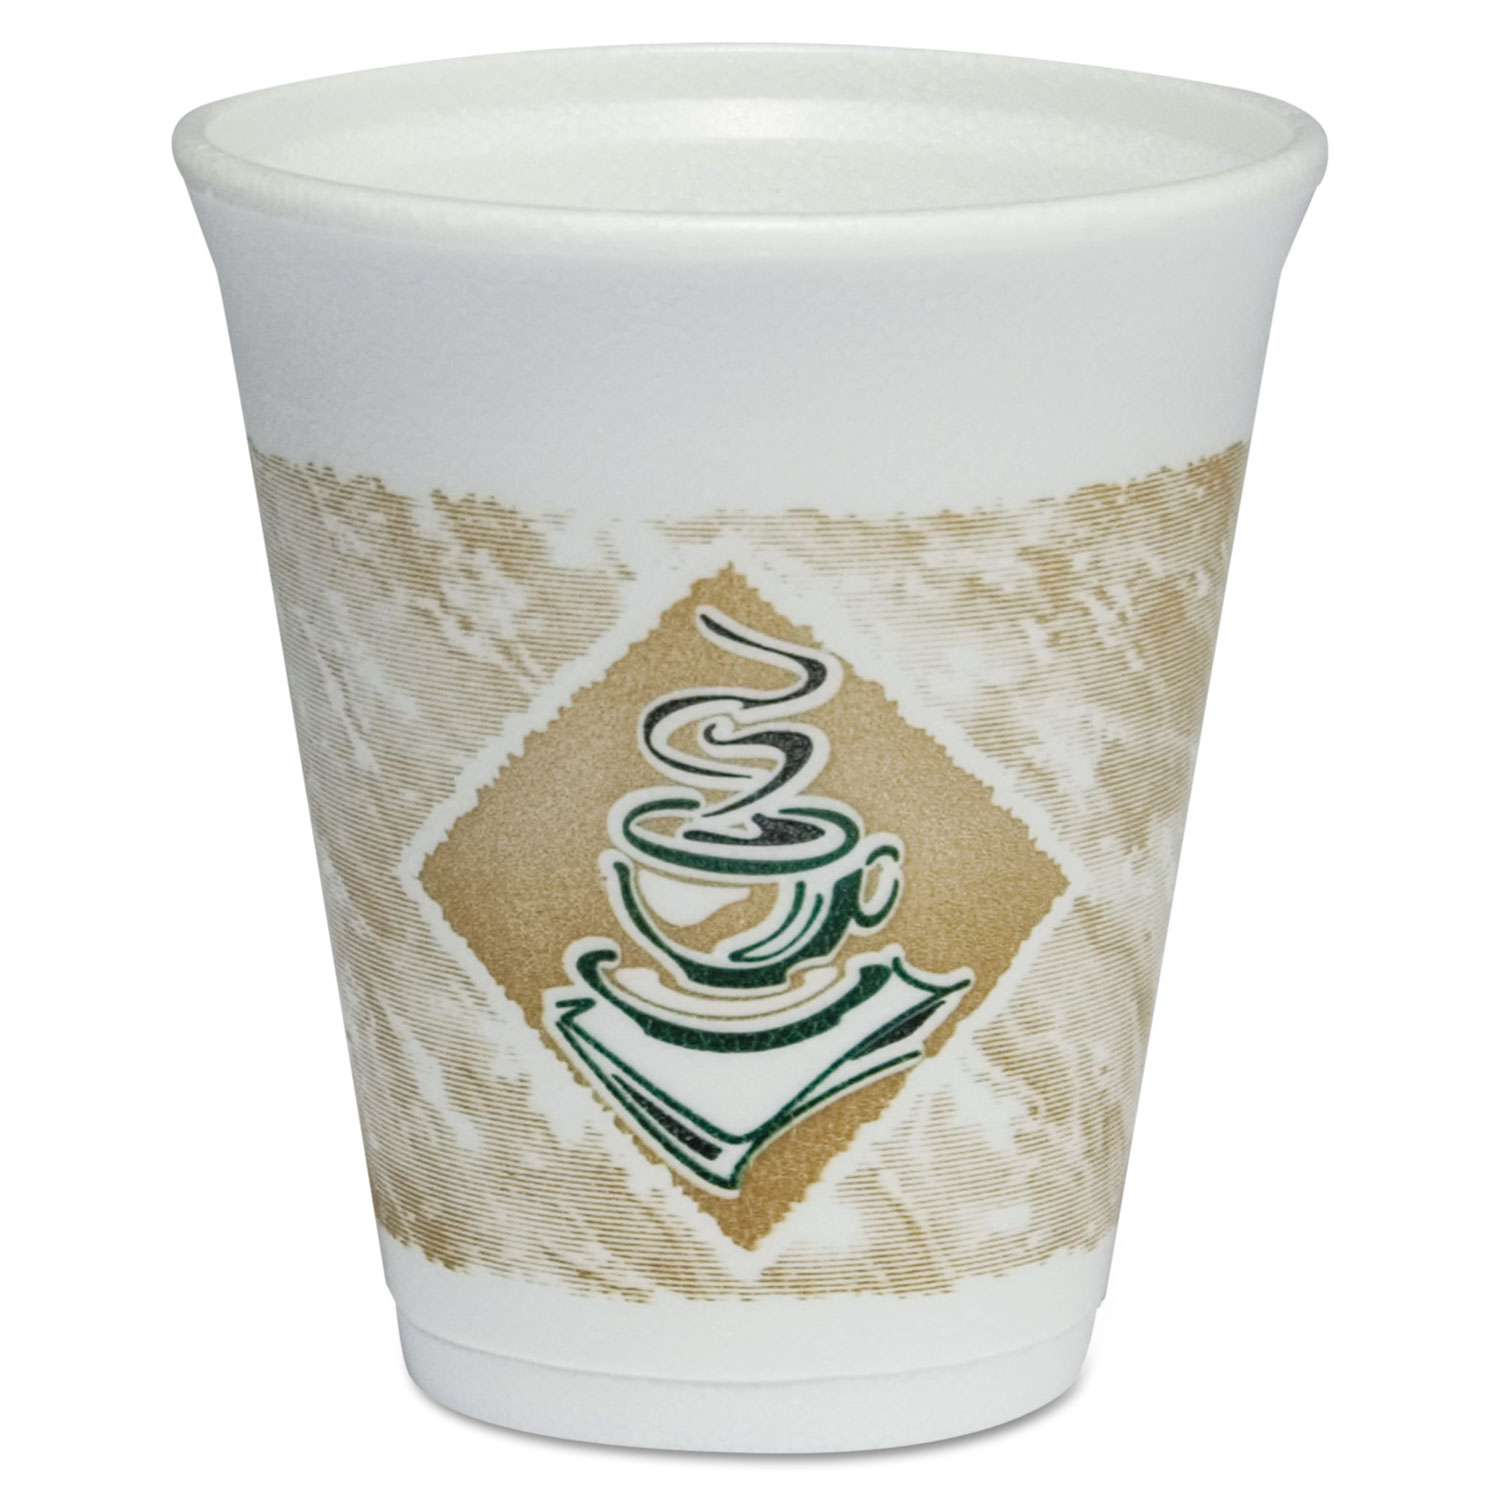 Printed Cafe G Foam / Polystyrene CATERING 0821/10 100 x Drinking Cup 10oz 